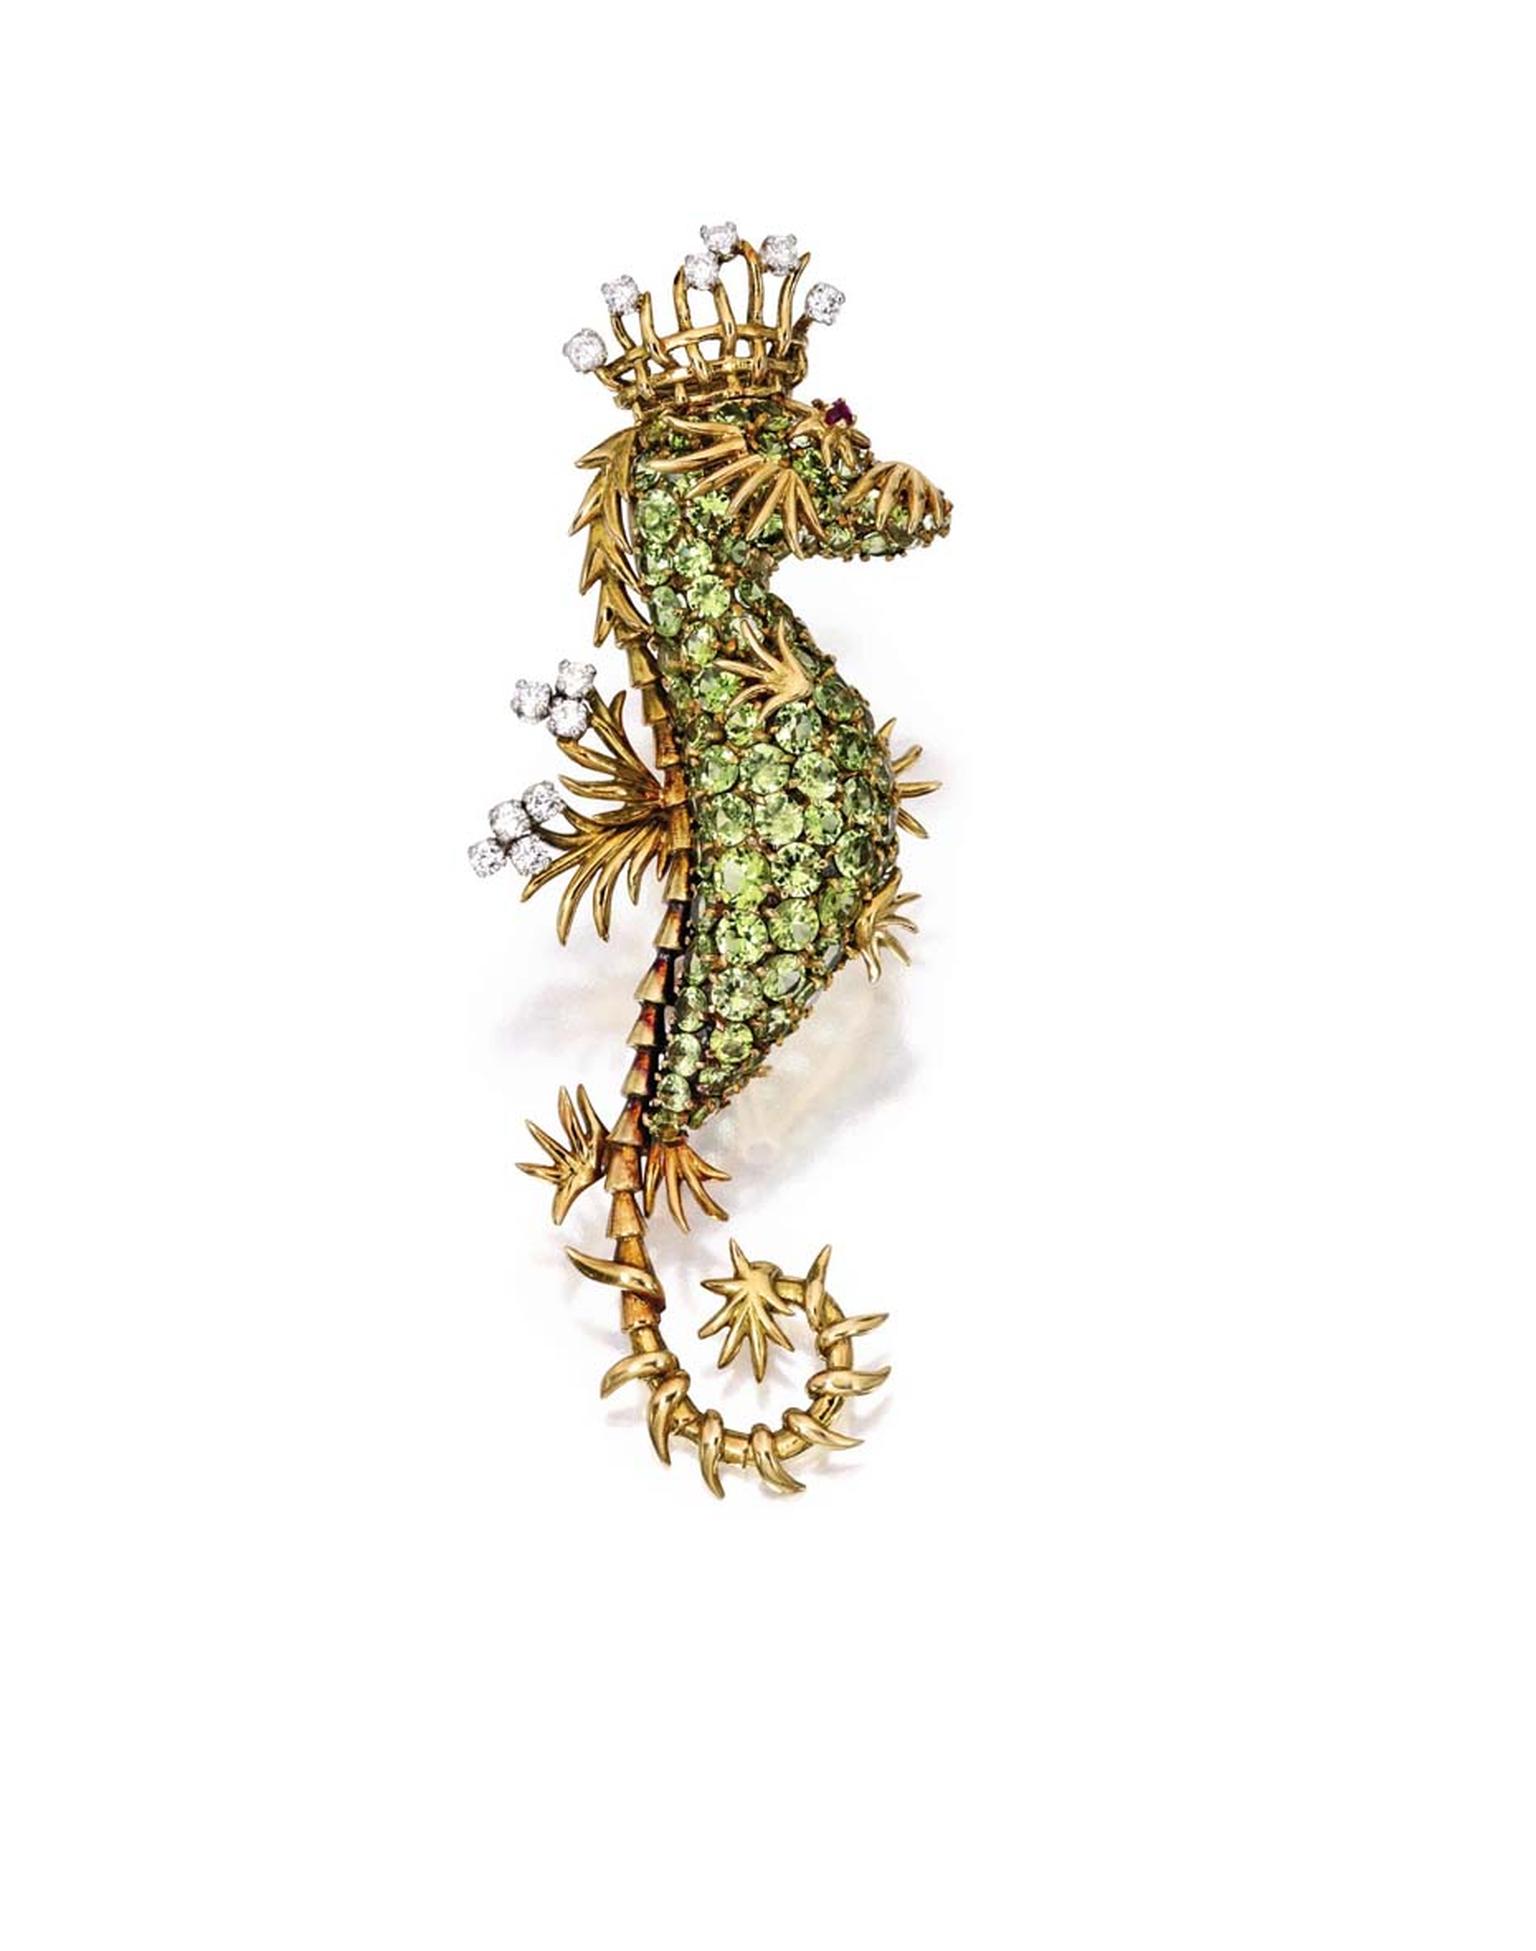 Seahorse brooch by Jean Schlumberger for Tiffany & Co, courtesy of Sotheby's.